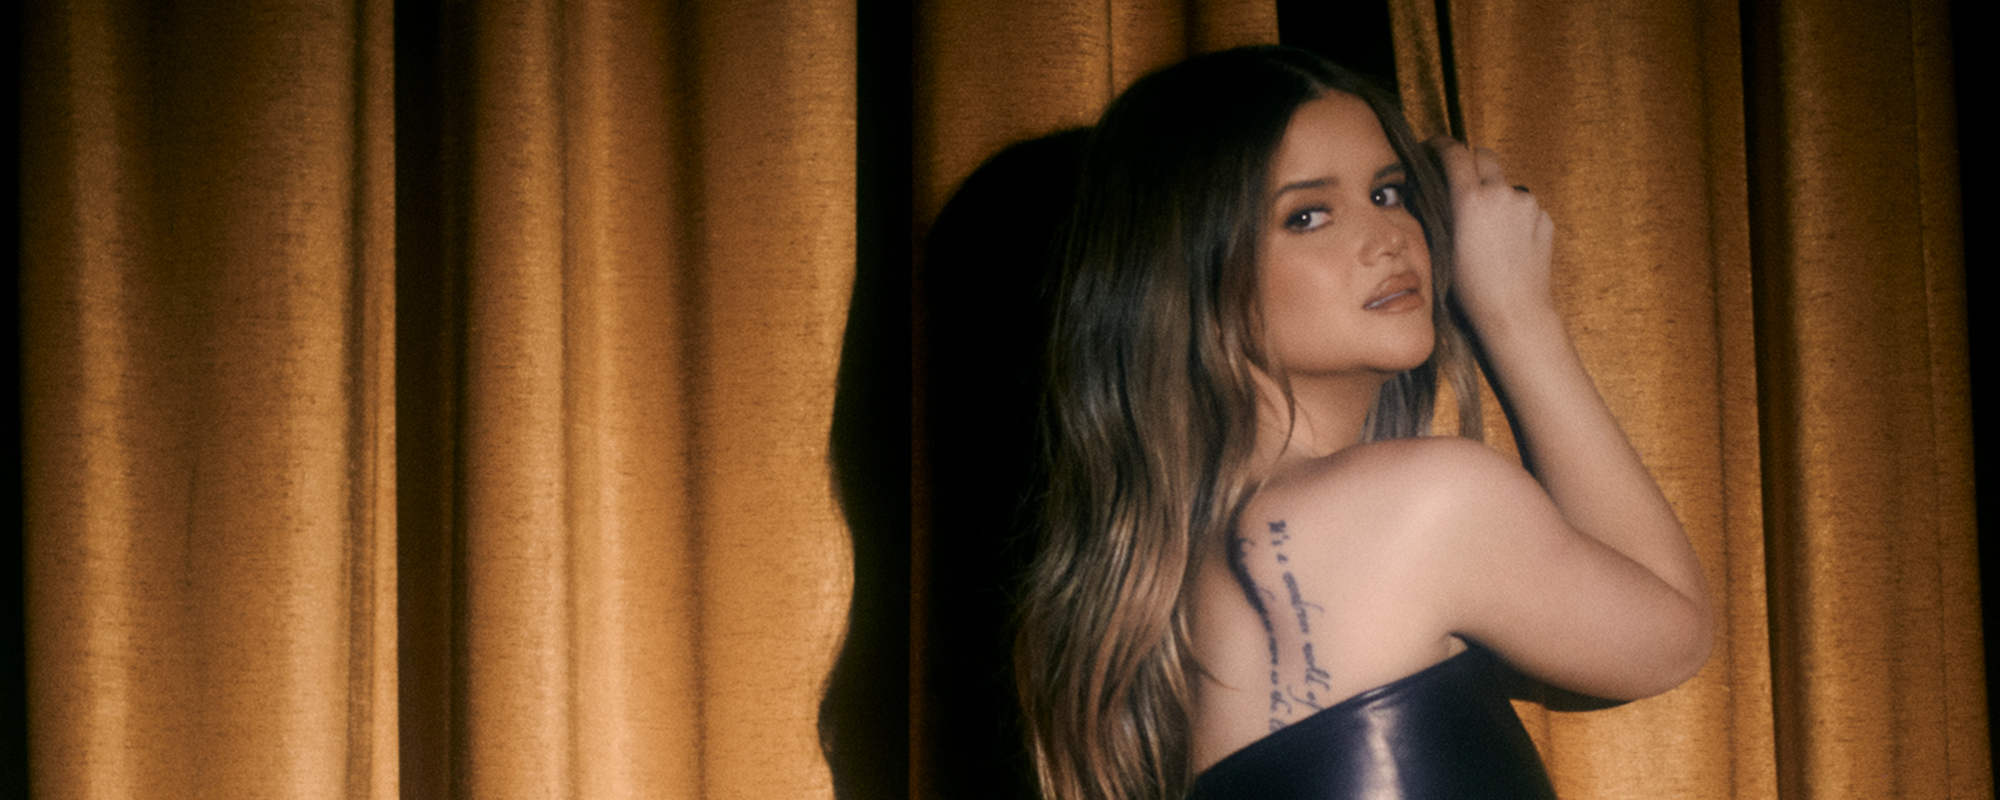 Maren Morris Reflects on Her Year: “My Cup Is So Full”